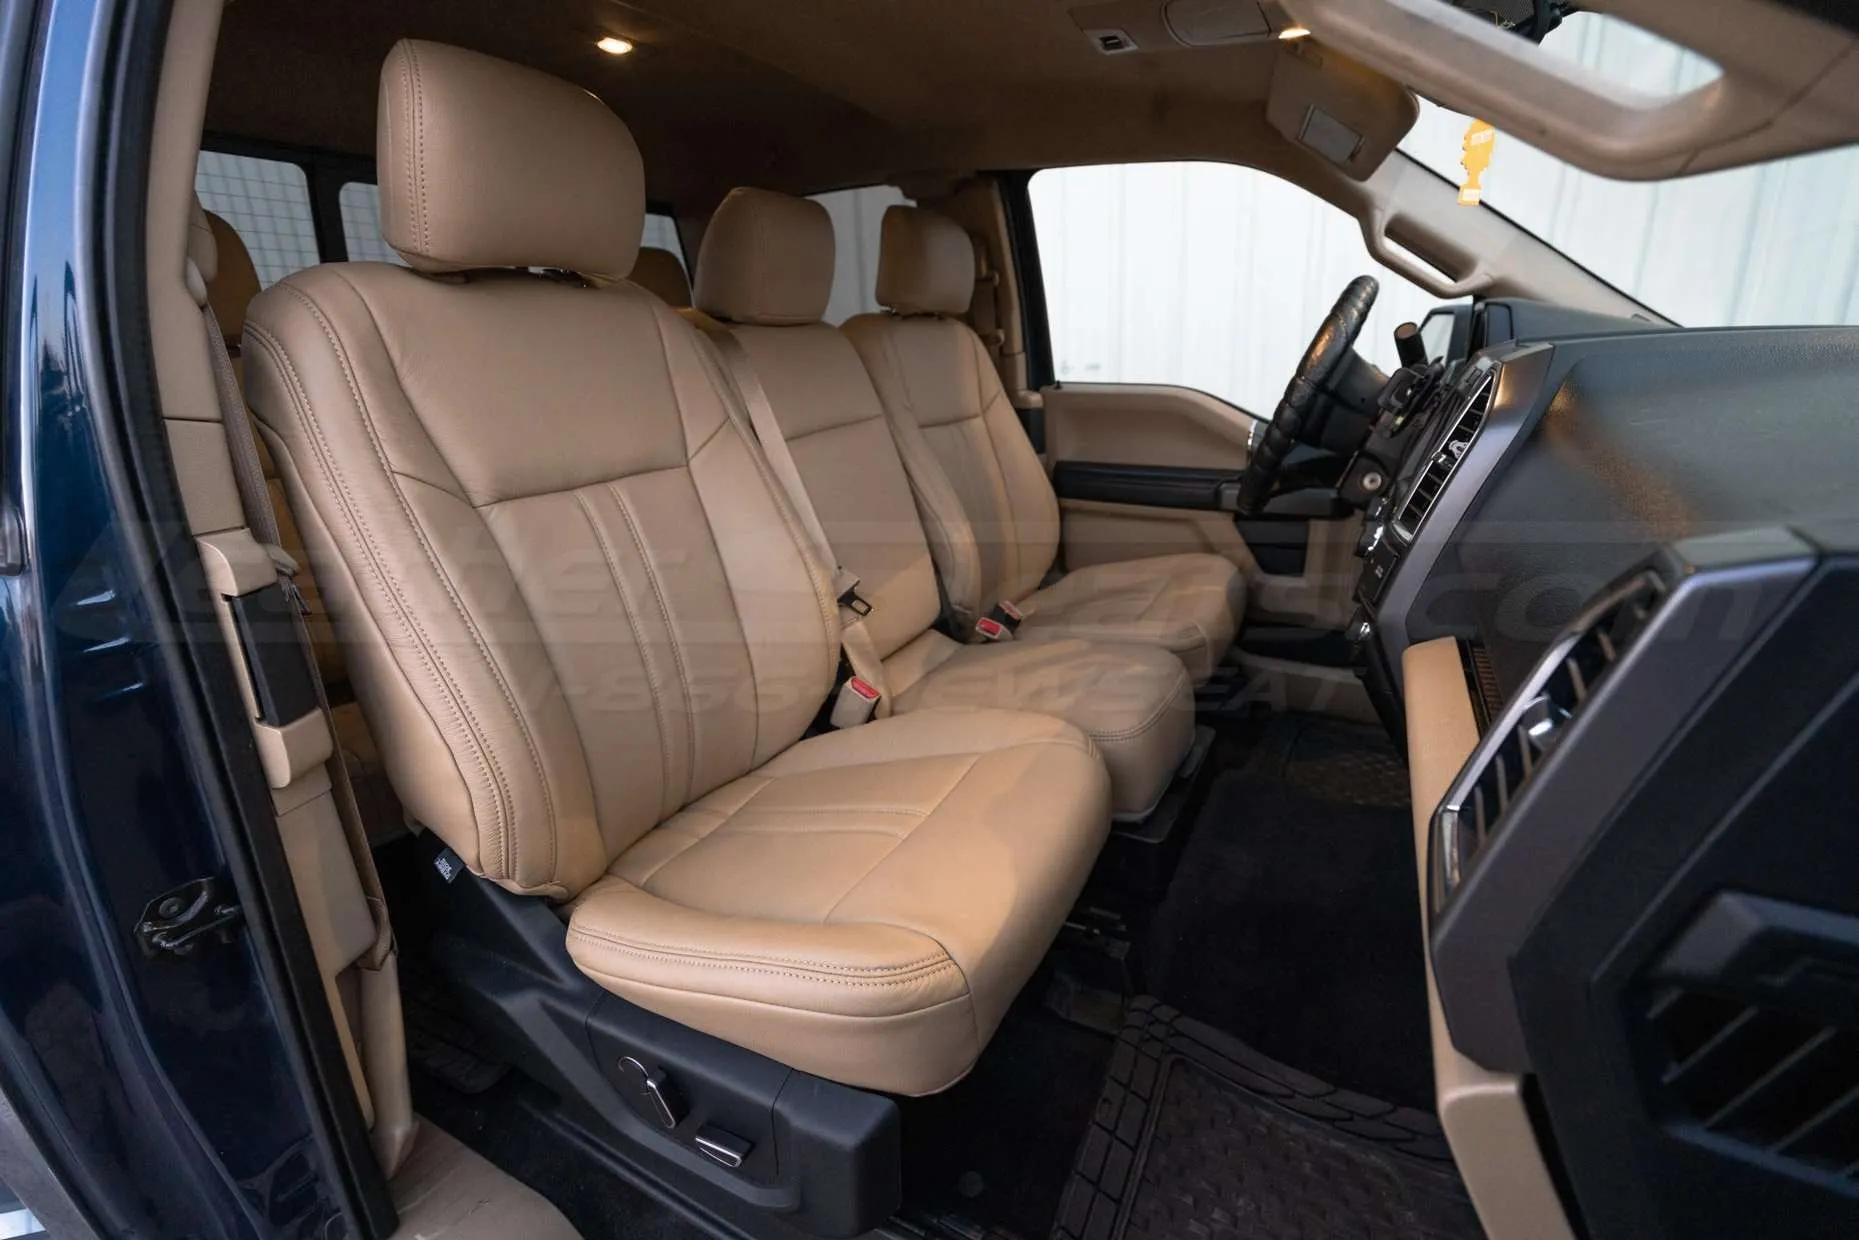 Front passenger view of Bisque leather seats with raised jump seat